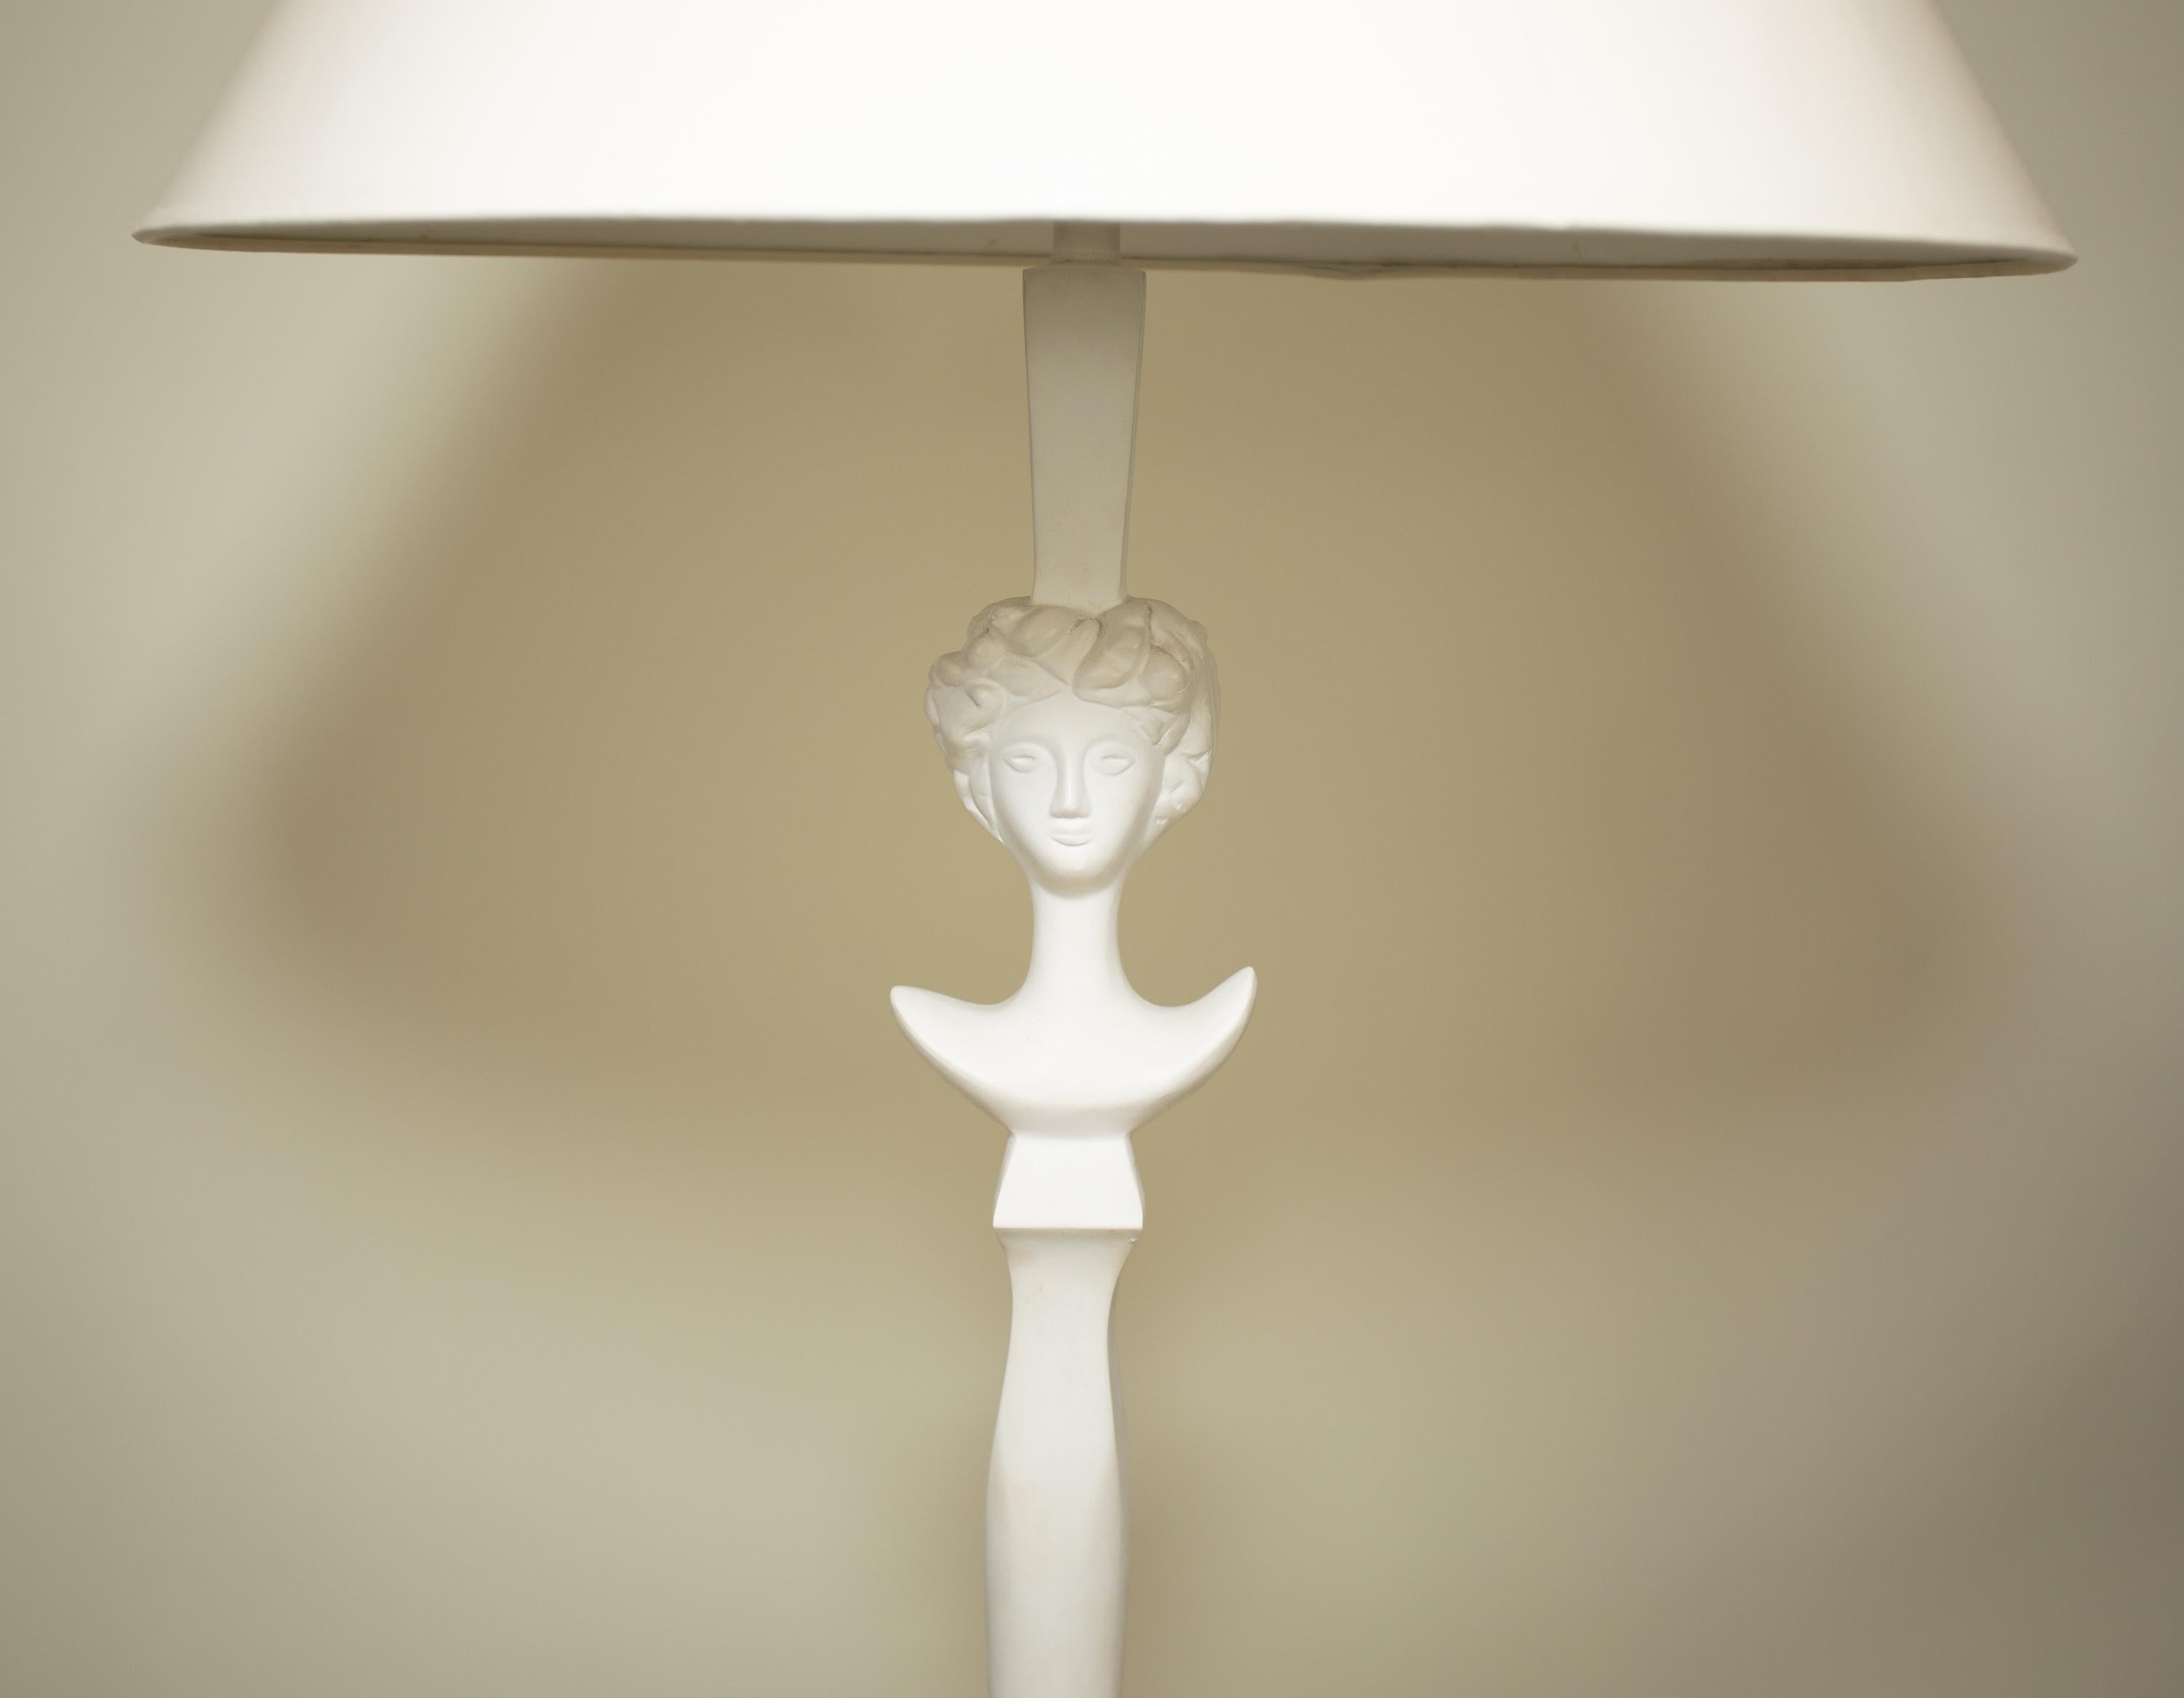 A Sirmos floor lamp after a design by Diego Giacometti
Original plaster surface and paper shade.